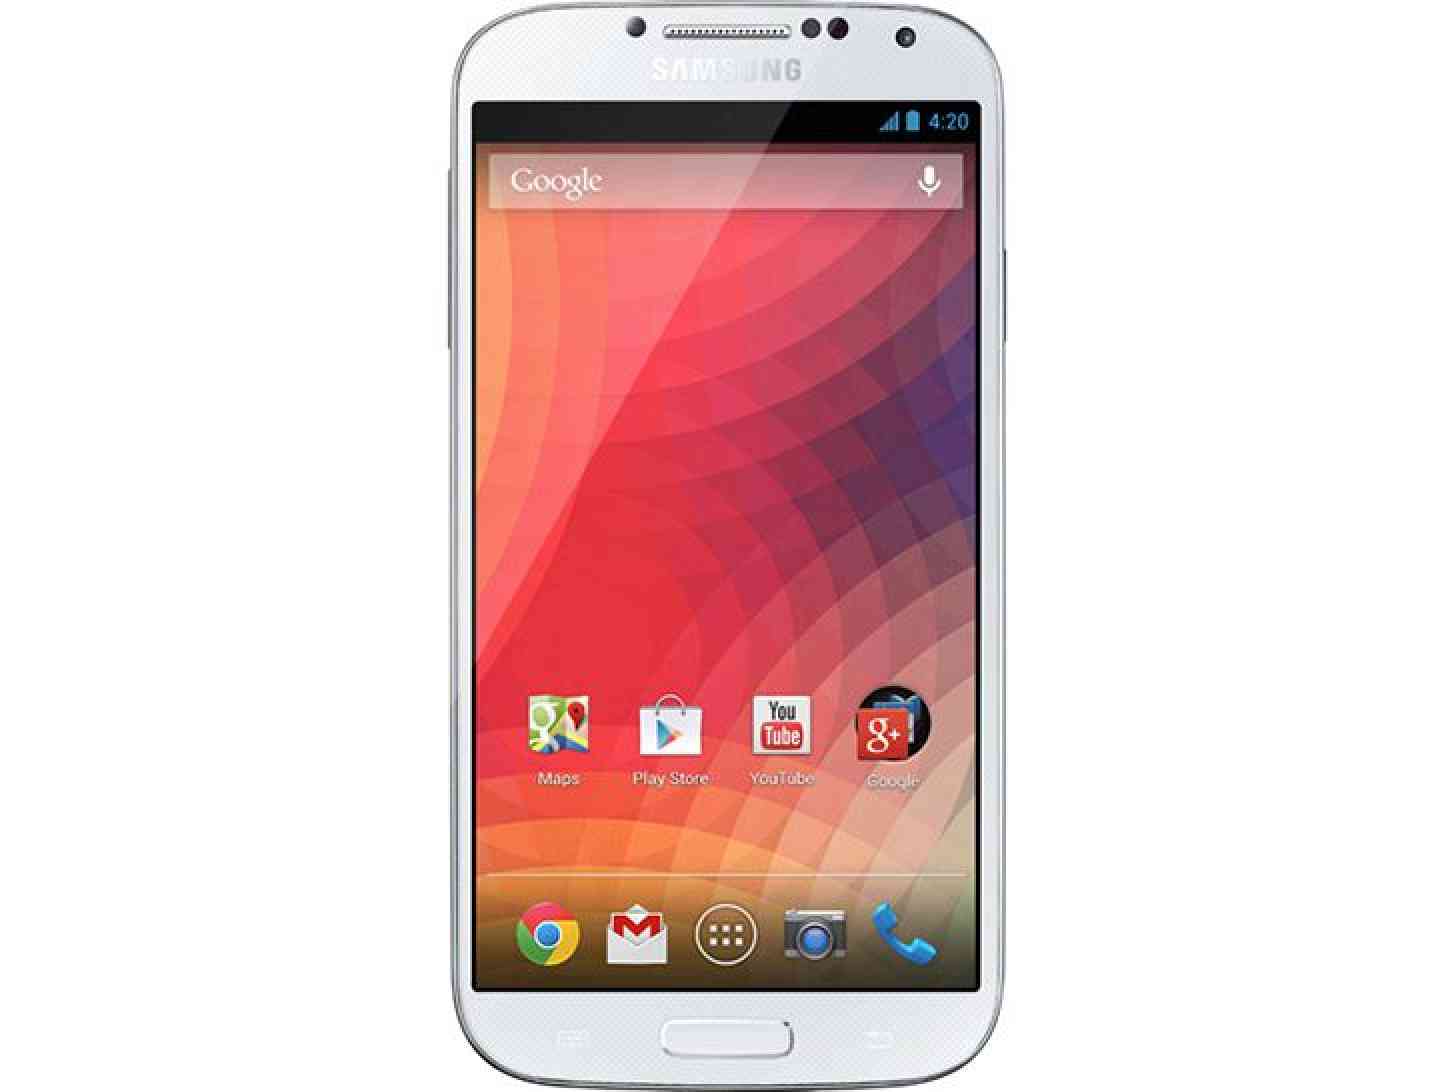 Samsung Galaxy S4 Google Play edition official